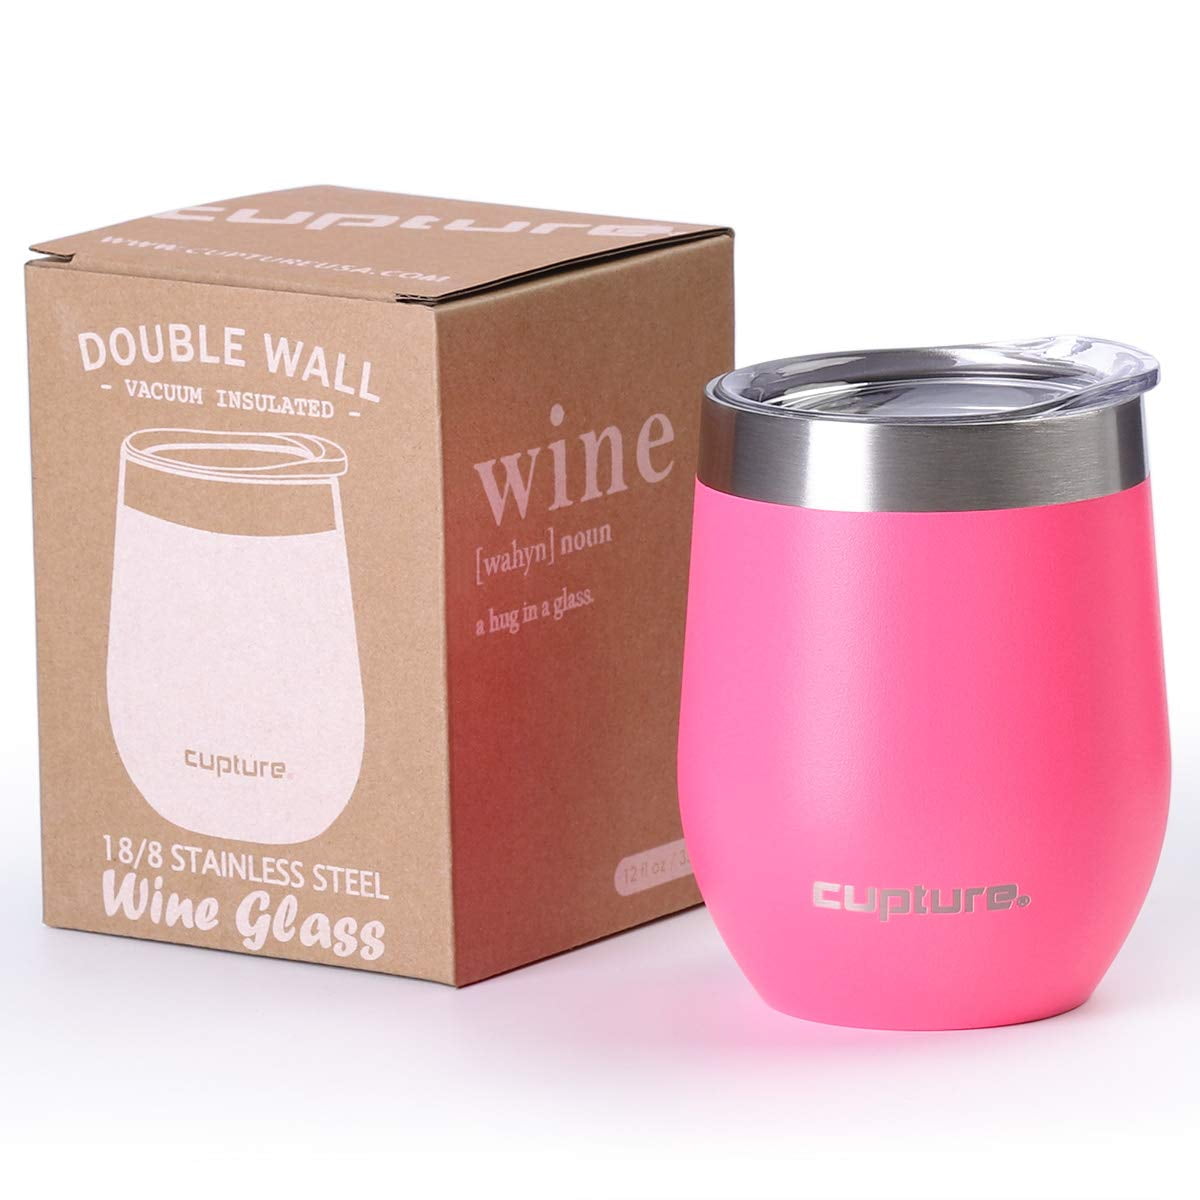 6 Pack Stainless Steel Wine Tumbler with lid. 12OZ Stemless Double Wall Insulated  Wine Tumbler.Wine Glass is suitable for different scenes, parties,outdoor,  gifts and so on.(Light Pink, 6) - Yahoo Shopping